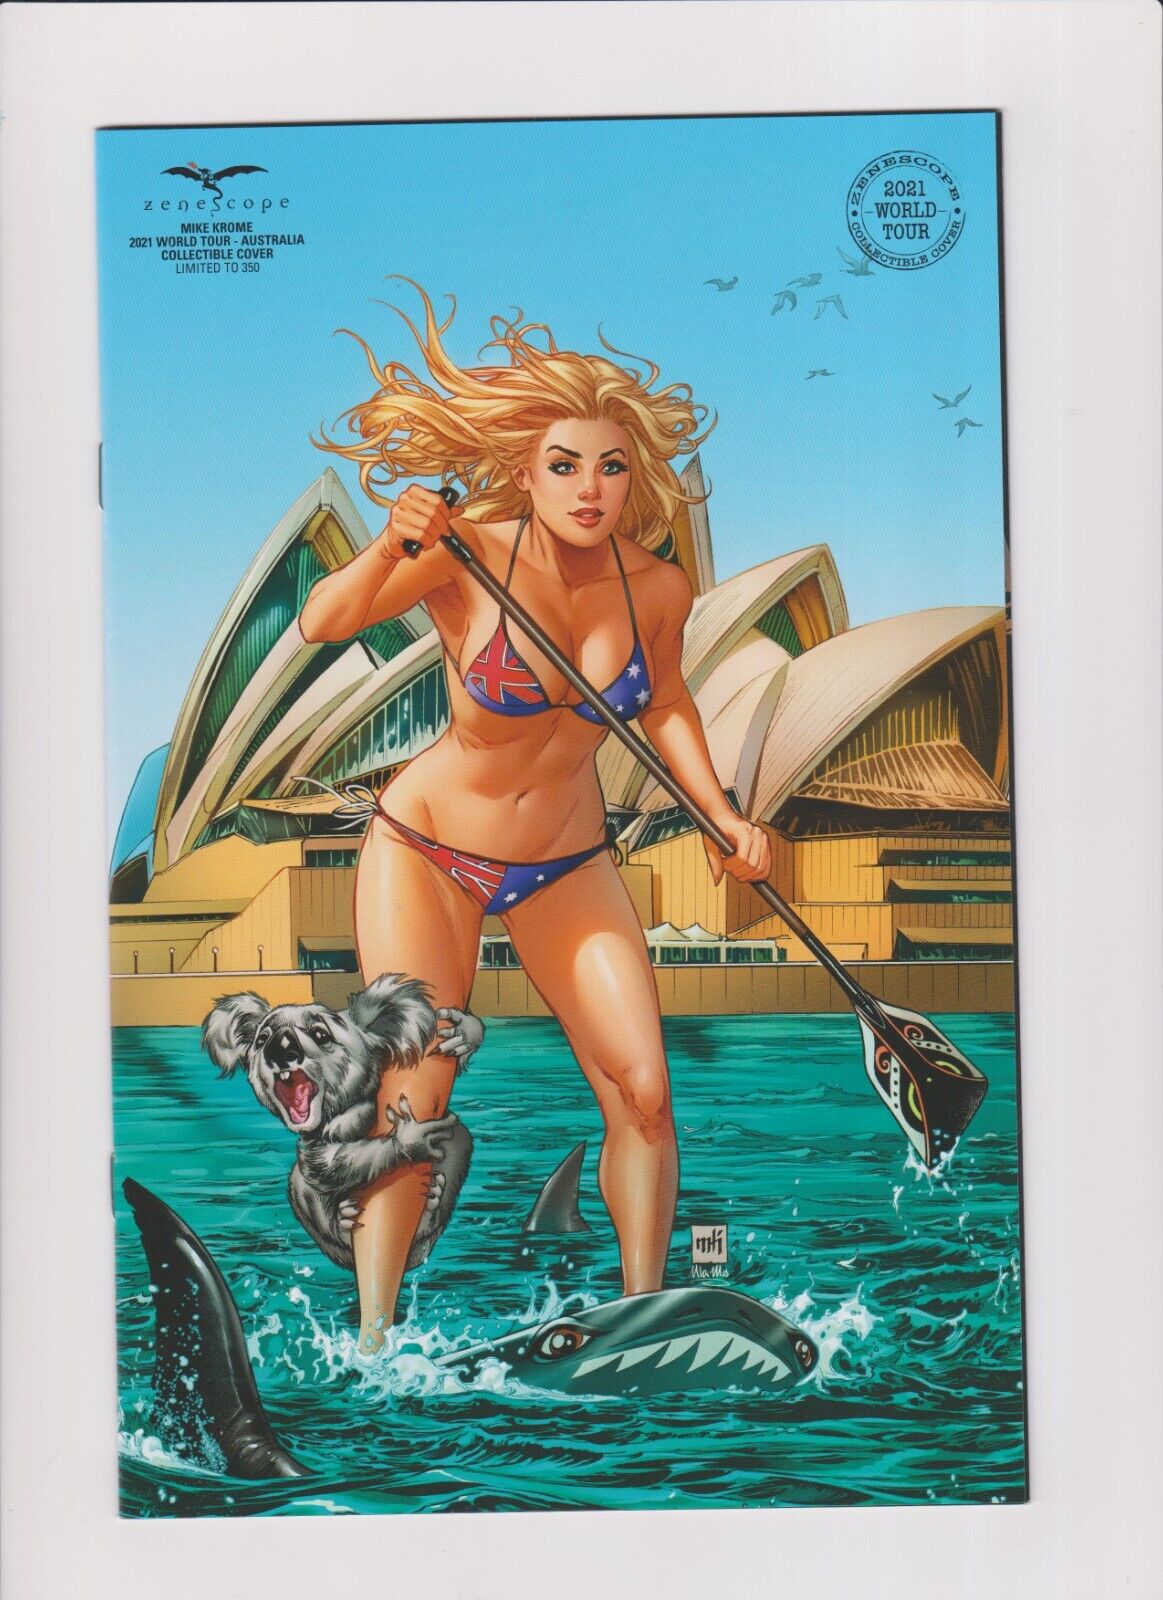 Robyn Hood: Voodoo Dawn - 2021 World Tour- Australia Collectible Cover - LE; 350